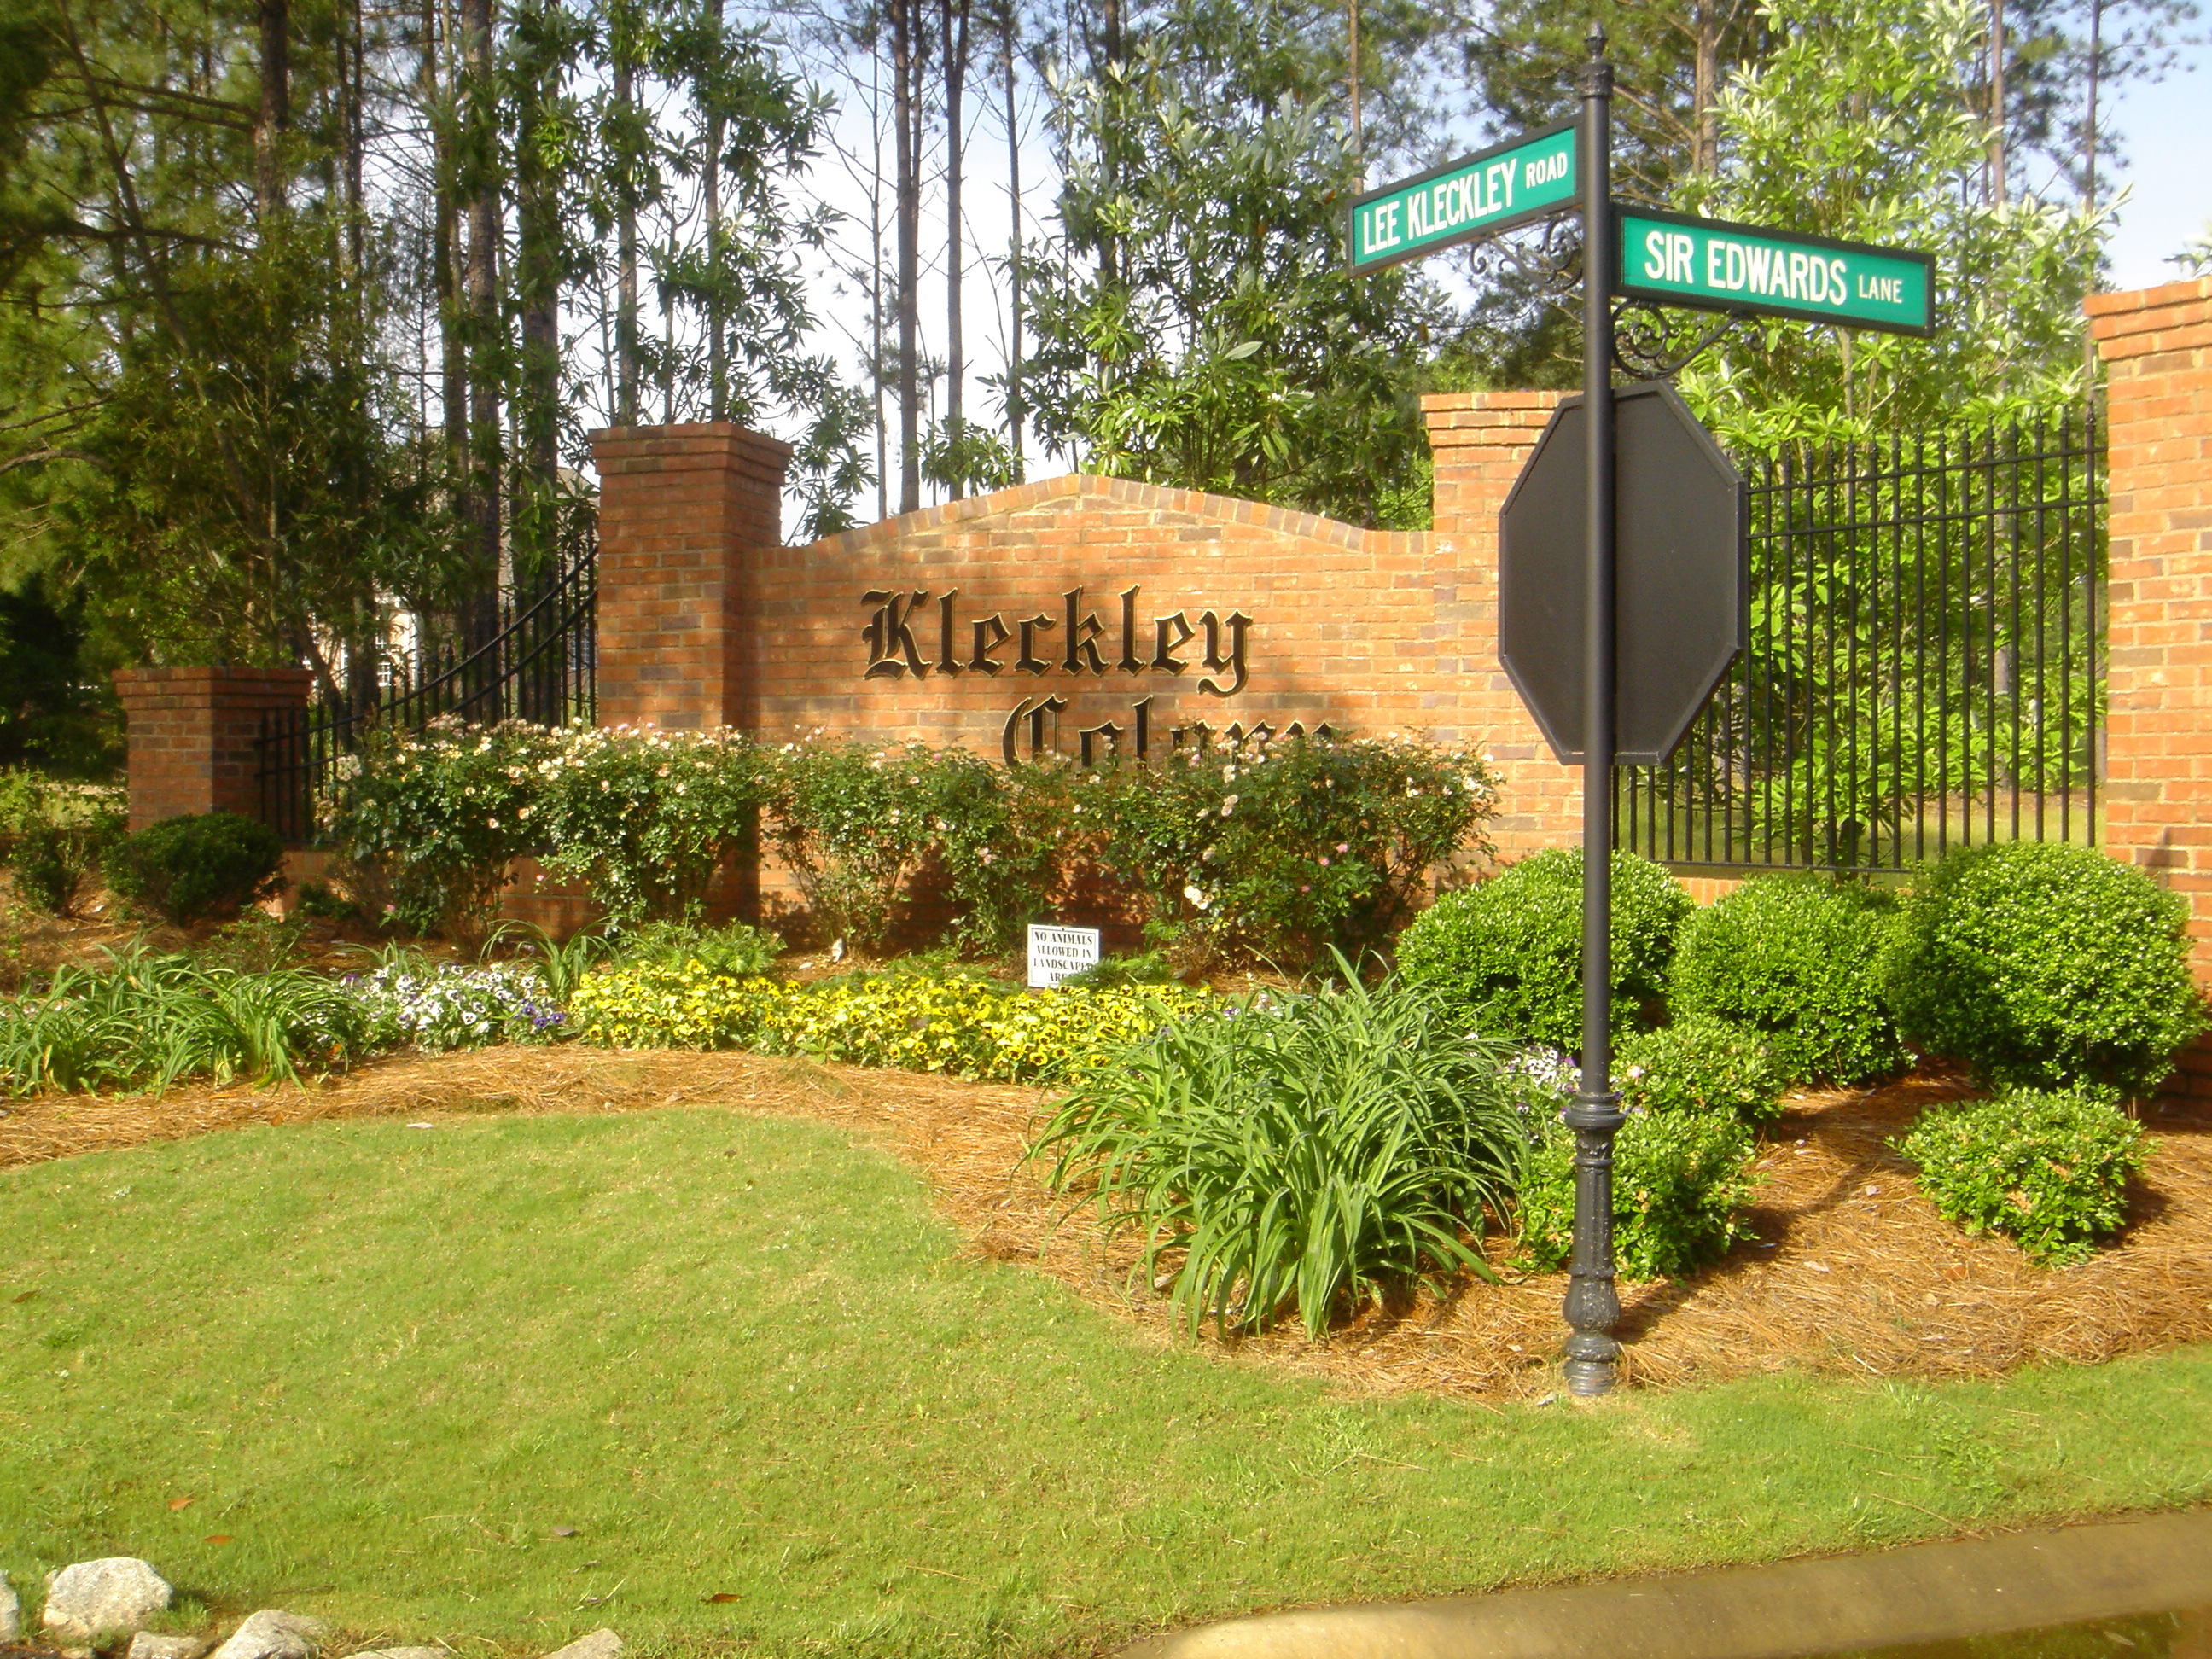 Jason Compton is now in charge of Marketing and the homes for sale in Kleckley Colony in Lexington SC